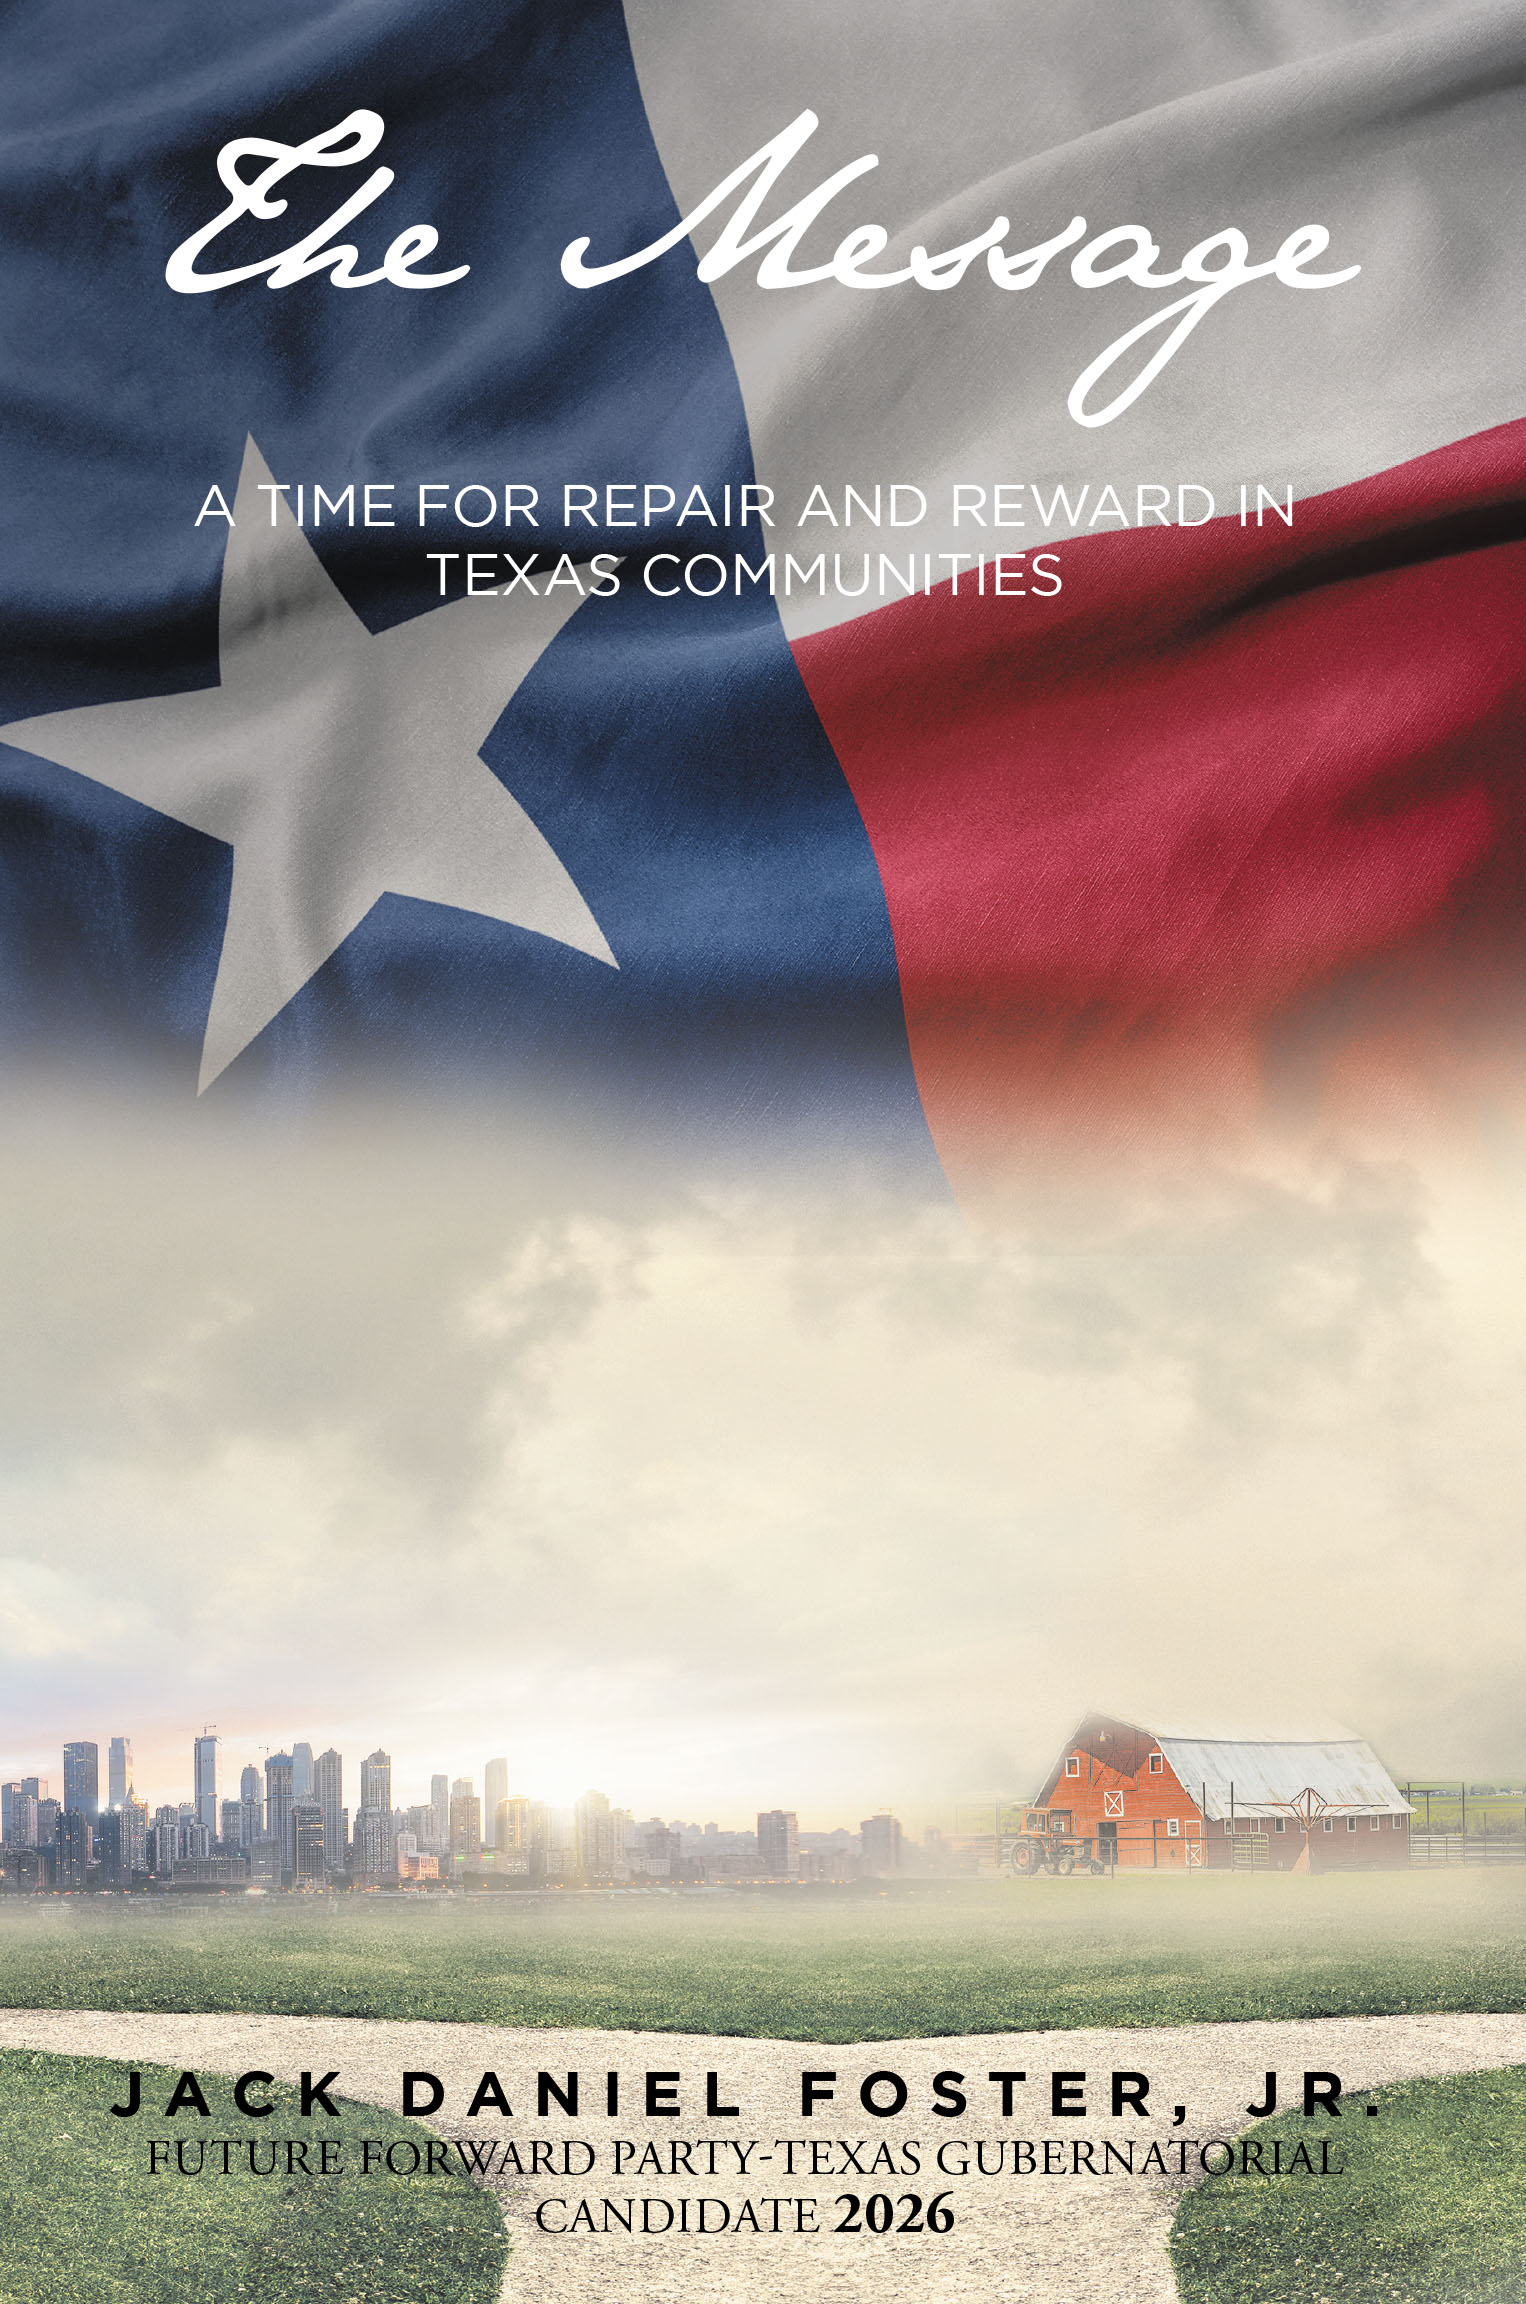 Jack Daniel Foster, Jr.’s New Book, “The Message: A Time for Repair and Reward in Texas Communities,” Explores the Author’s Plan to Reinvest in Texas as Its Governor